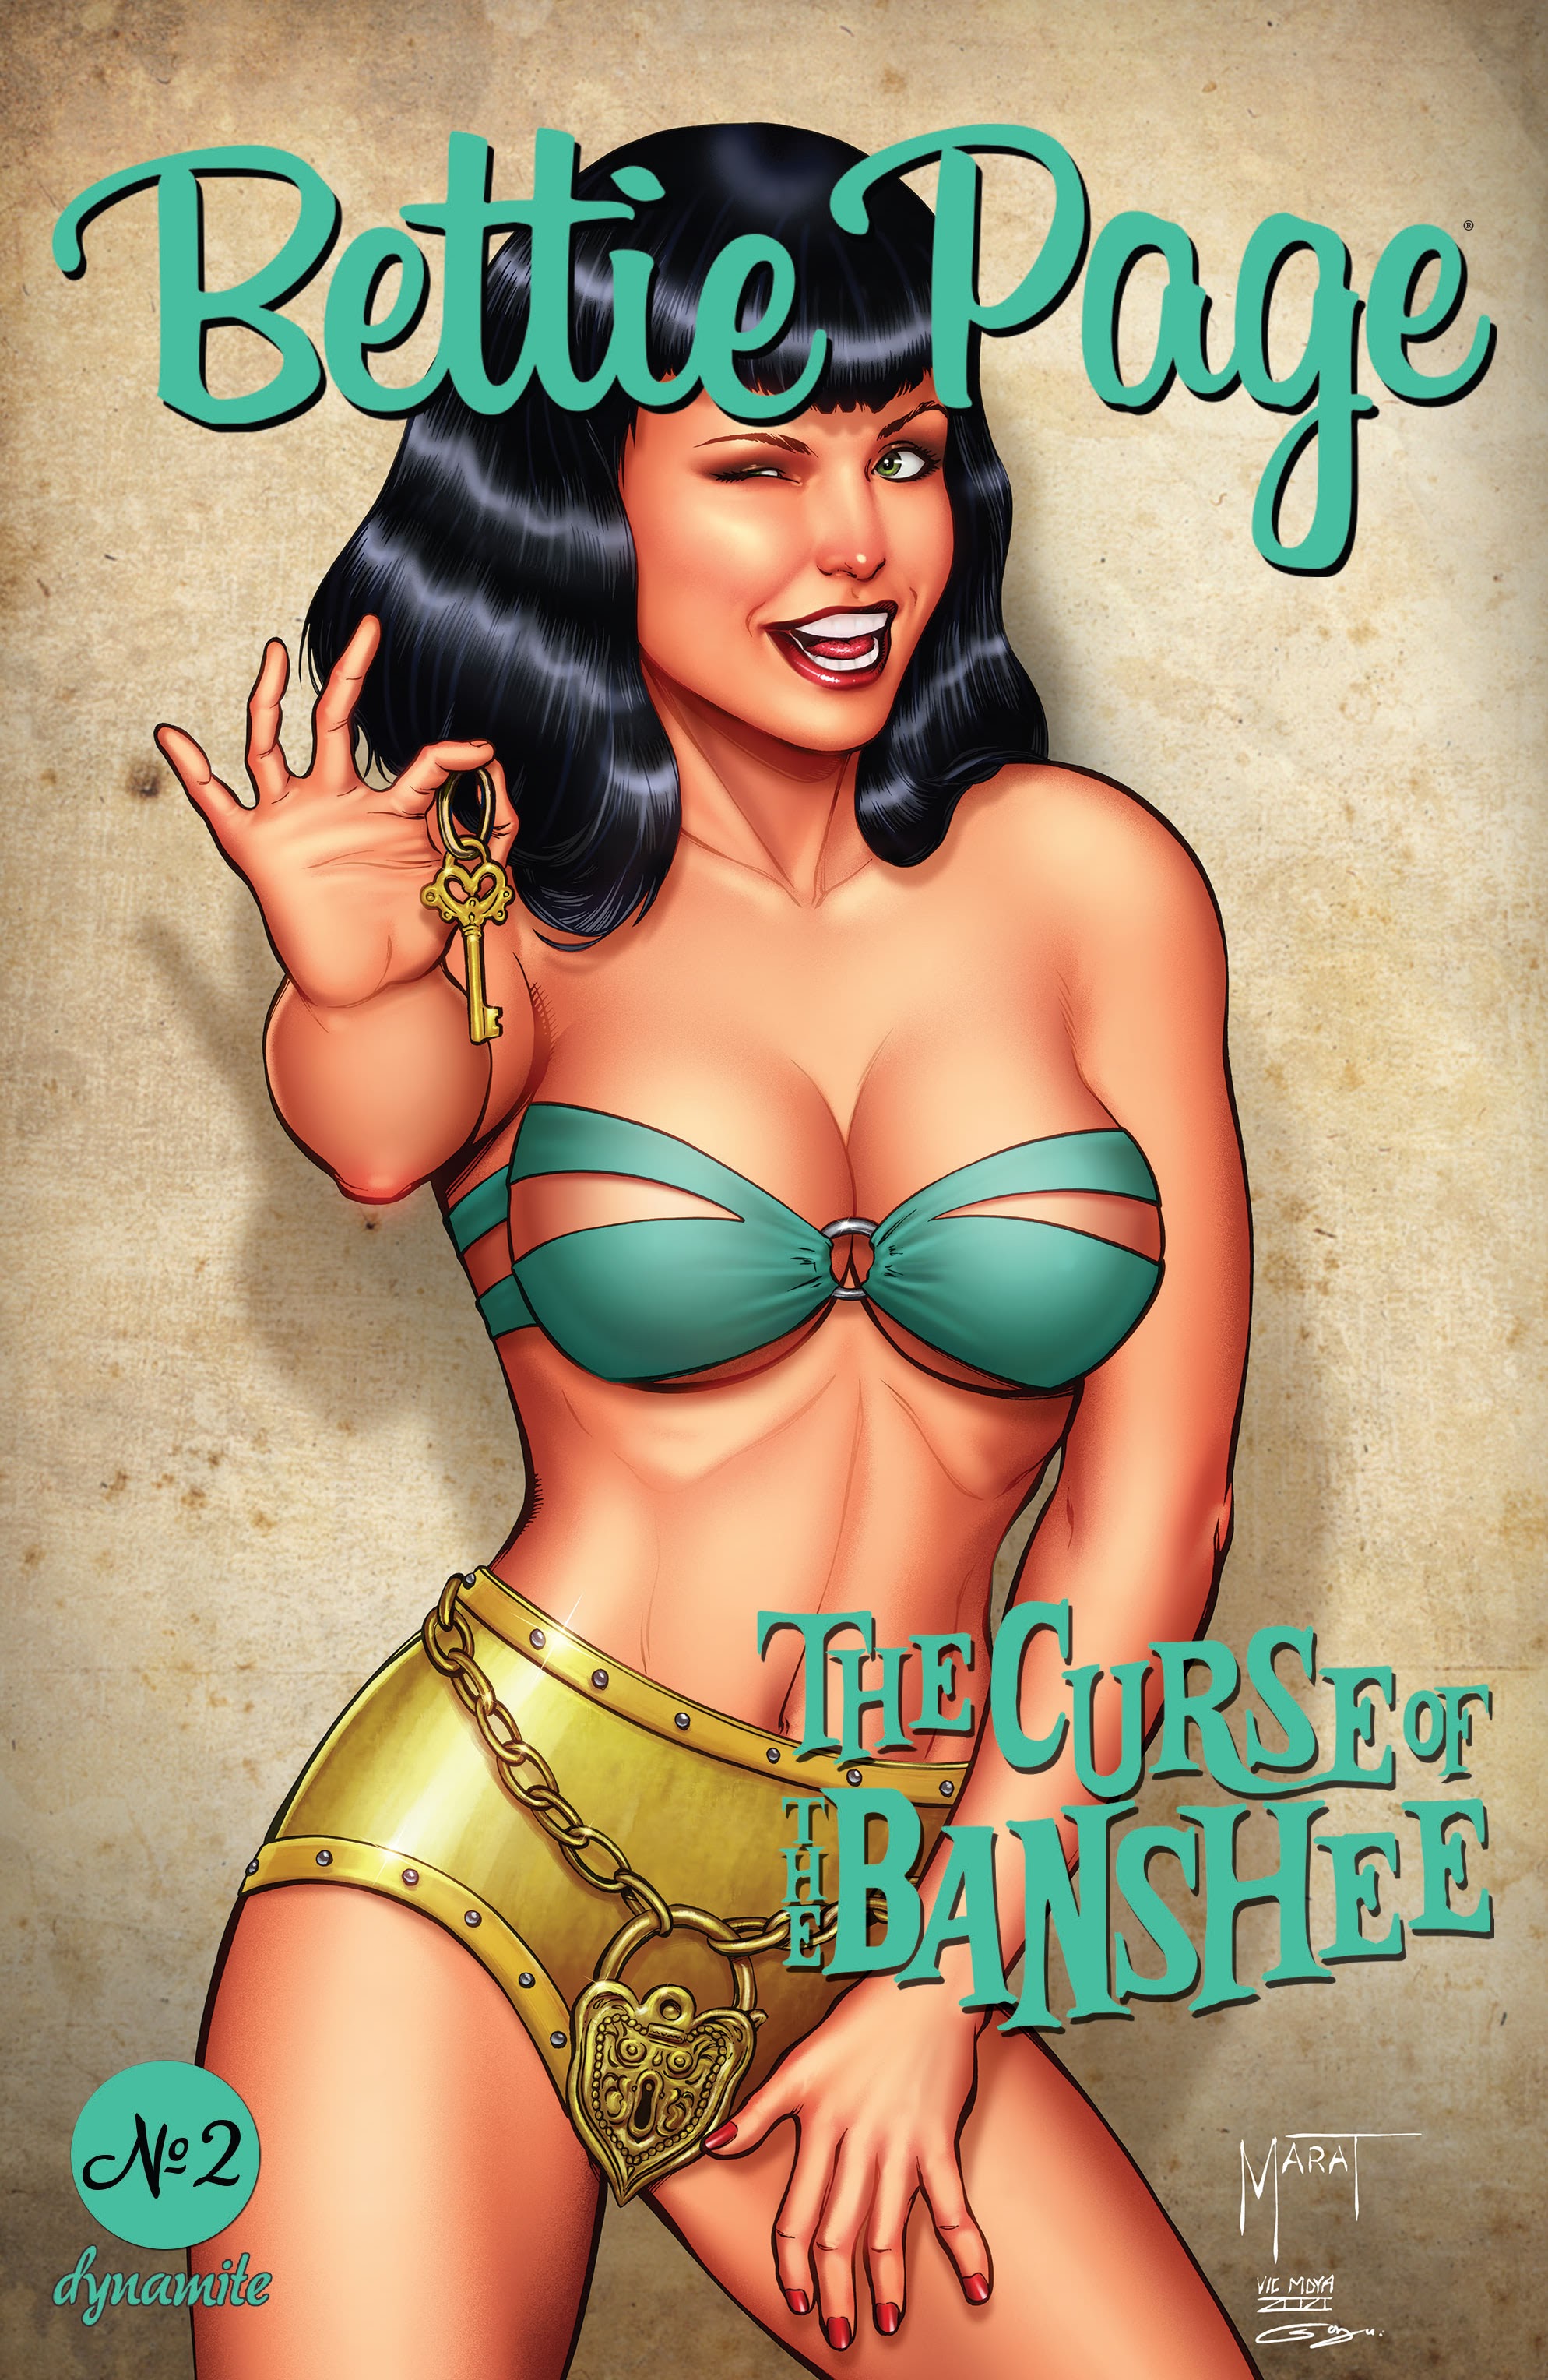 Read online Bettie Page & The Curse of the Banshee comic -  Issue #2 - 1